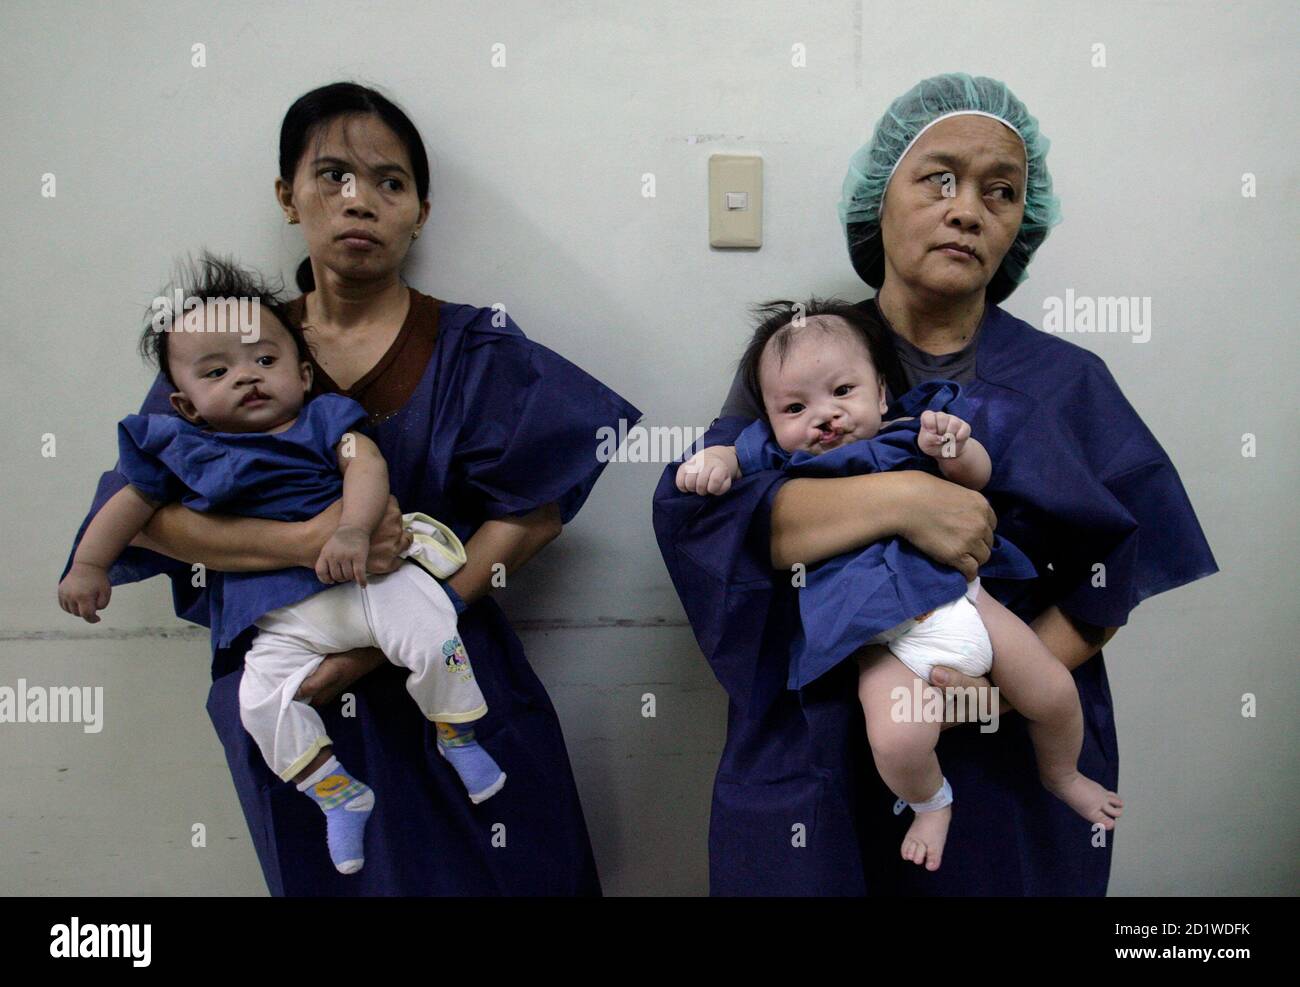 Baby boys, inflicted with cleft lips, are carried by their mothers as they wait for their surgery during 'Operation Restore Hope' at Diosdado Macapagal Memorial Medical Center in Caloocan City, Metro Manila April 12, 2010. Operation Restore Hope, a group of medical volunteers from Germany, New Zealand and Australia who perform surgeries for underprivileged children every year, aim to provide free surgery for about 70-80 children inflicted with cleft lips, cleft palates, and other facial deformities over a period of five days. REUTERS/Cheryl Ravelo (PHILIPPINES - Tags: HEALTH SOCIETY) Stock Photo